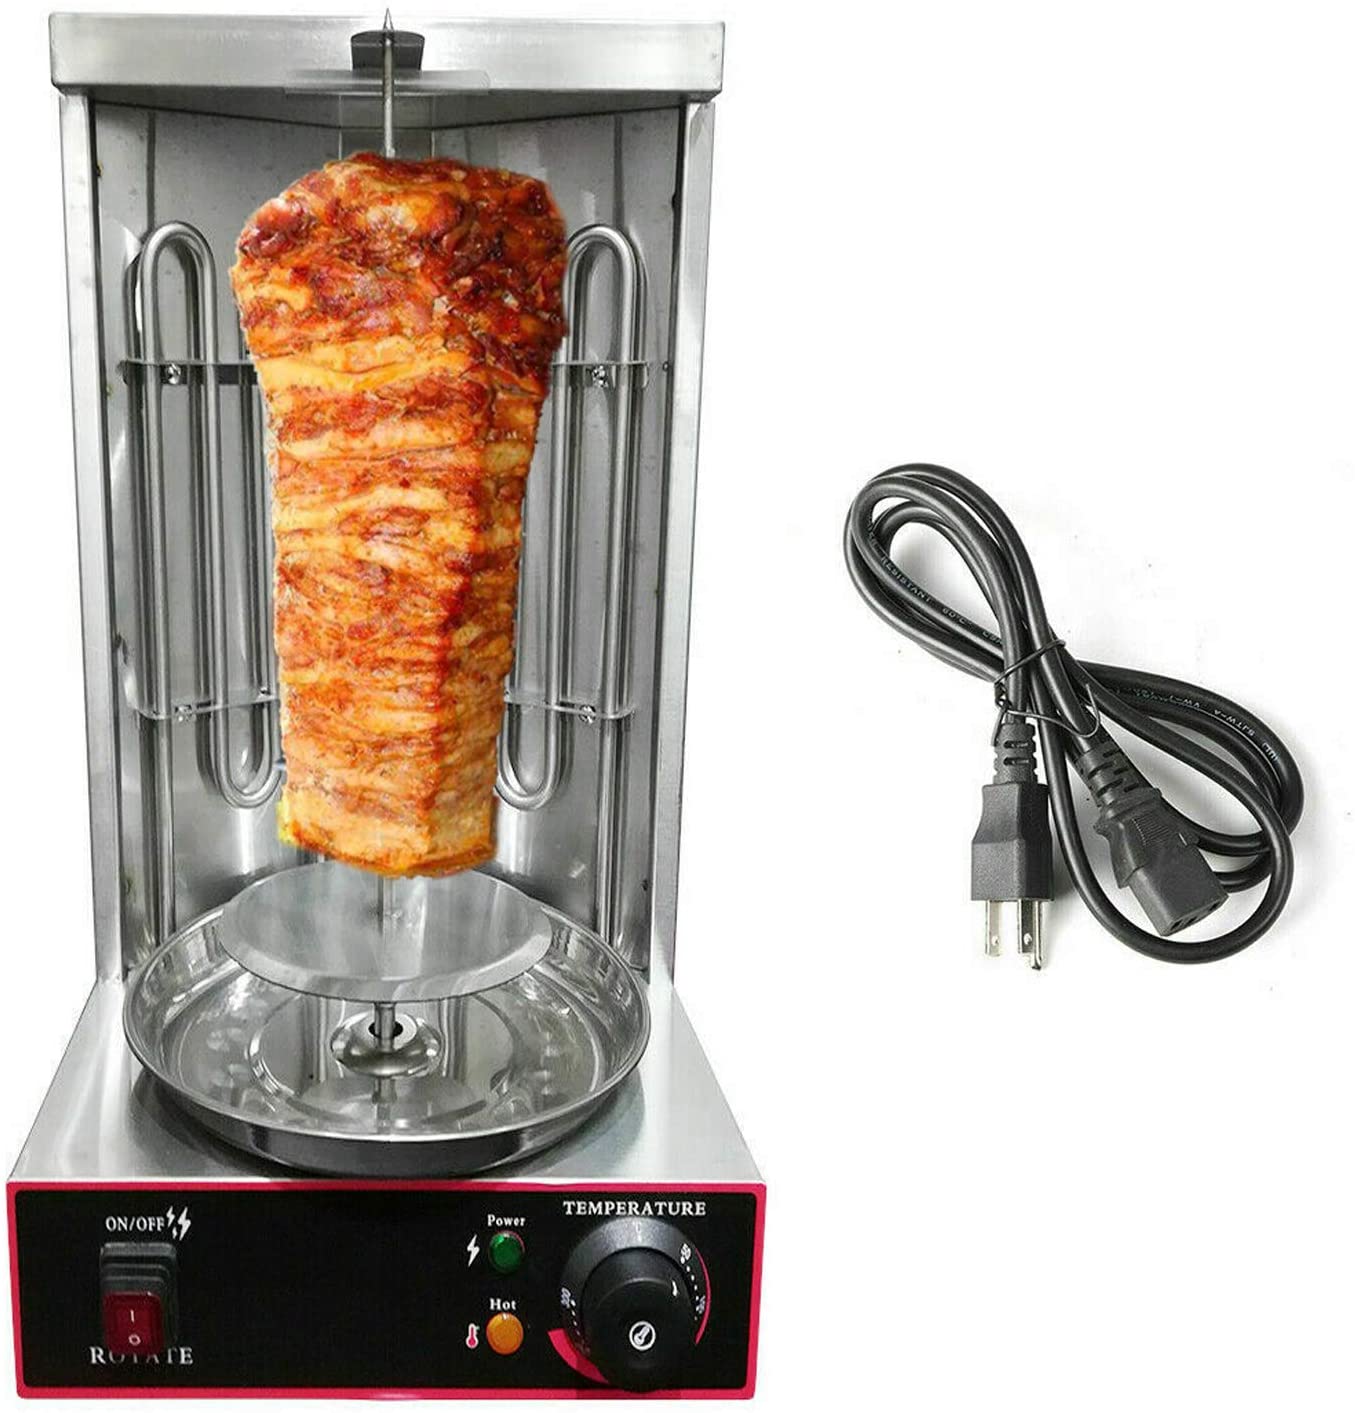 TFCFL Stainless Steel Rotating Kebab Maker Machine Barbecue Electric Heating Barbecue Grill Rotisserie Oven Automatic Rotating Machine Barbecue Oven - image 2 of 6